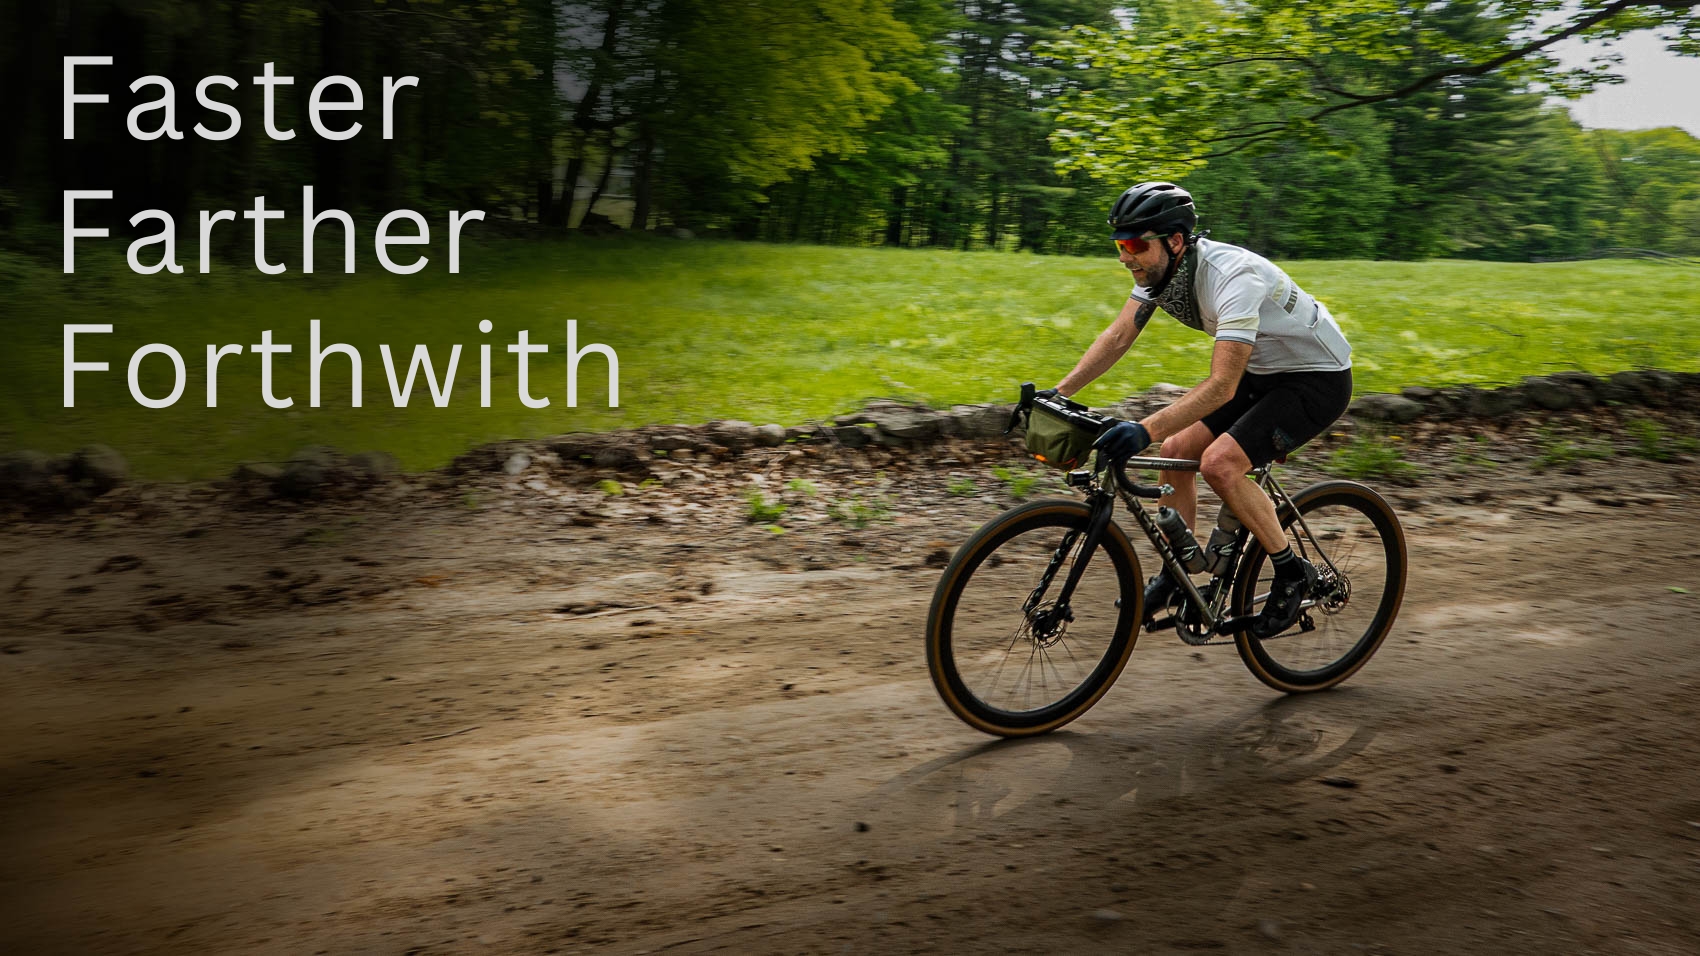 faster-farther-forthwith-gravel